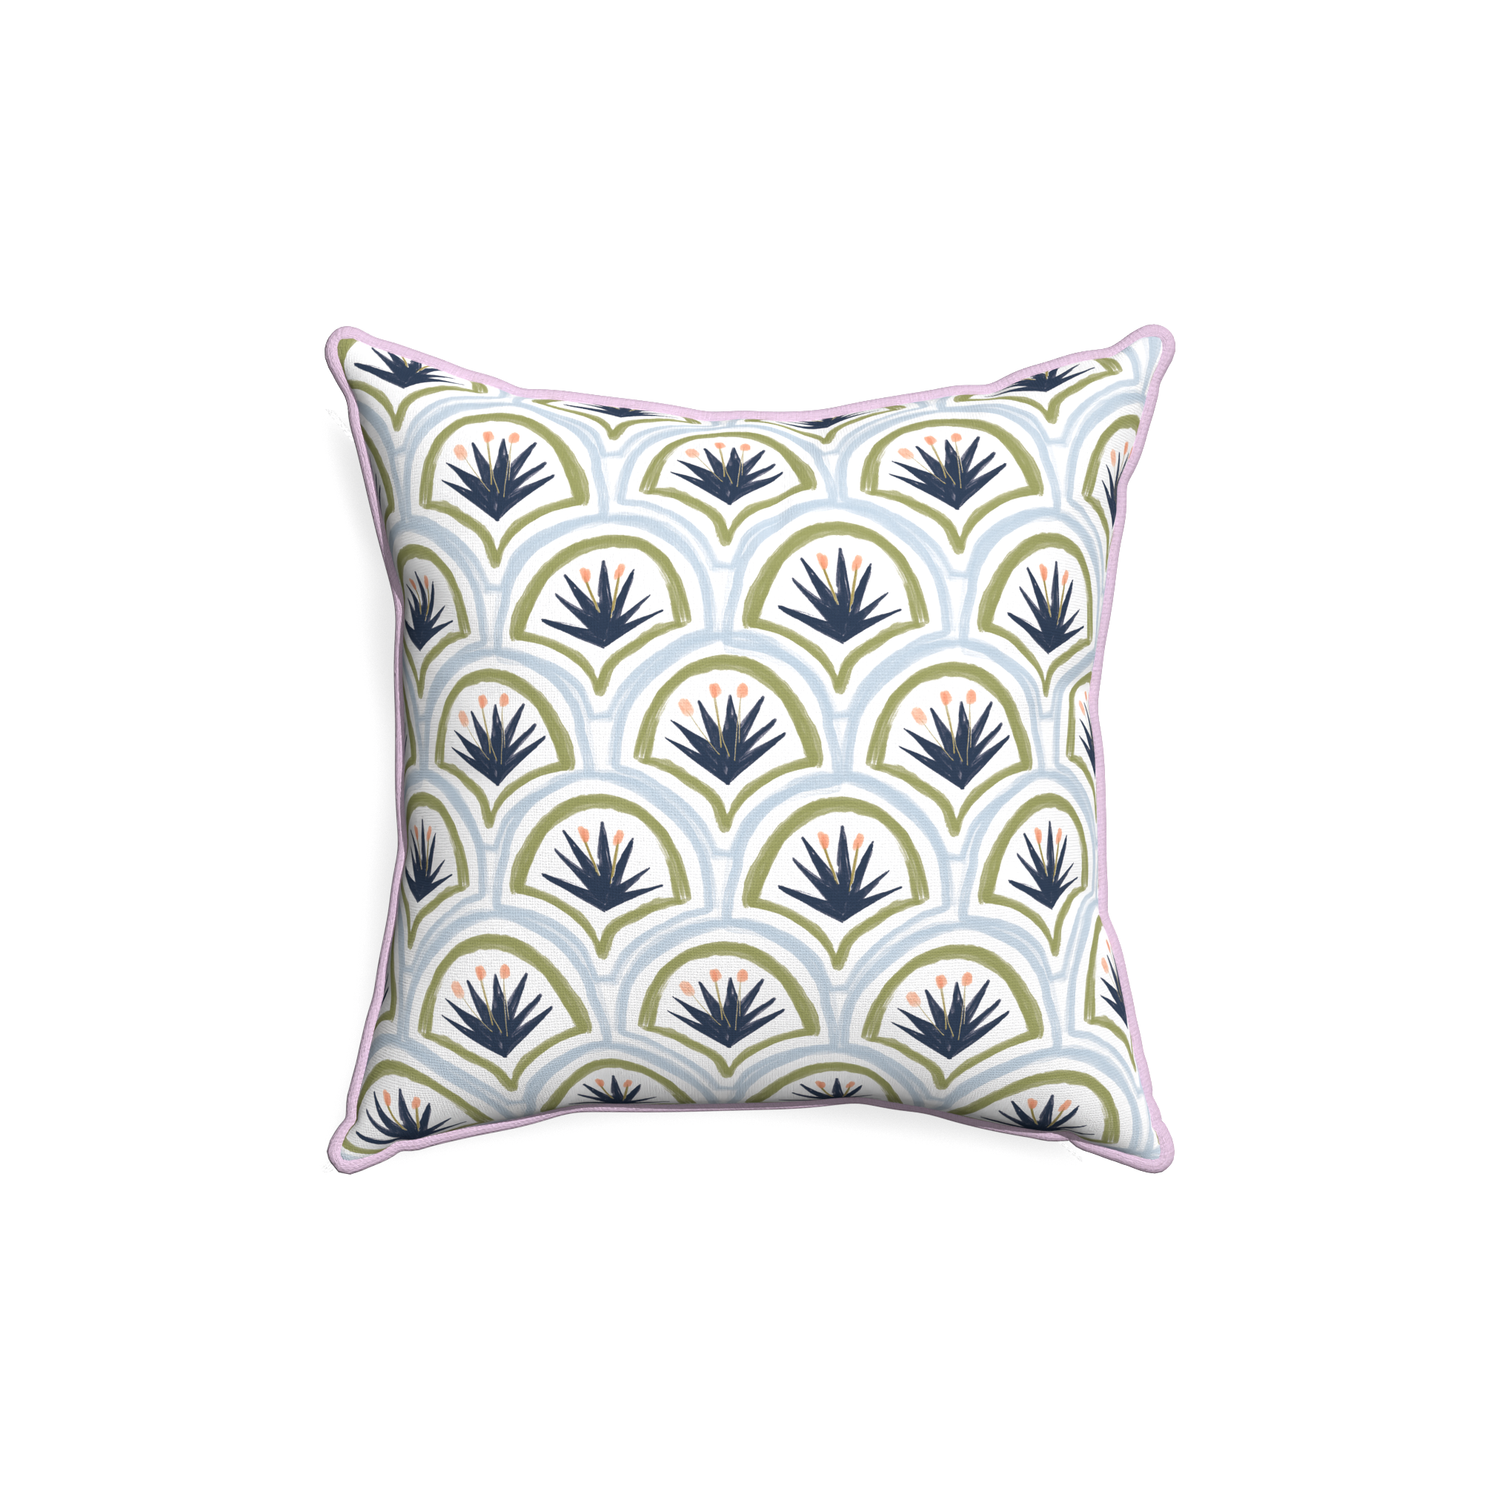 18-square thatcher midnight custom art deco palm patternpillow with l piping on white background